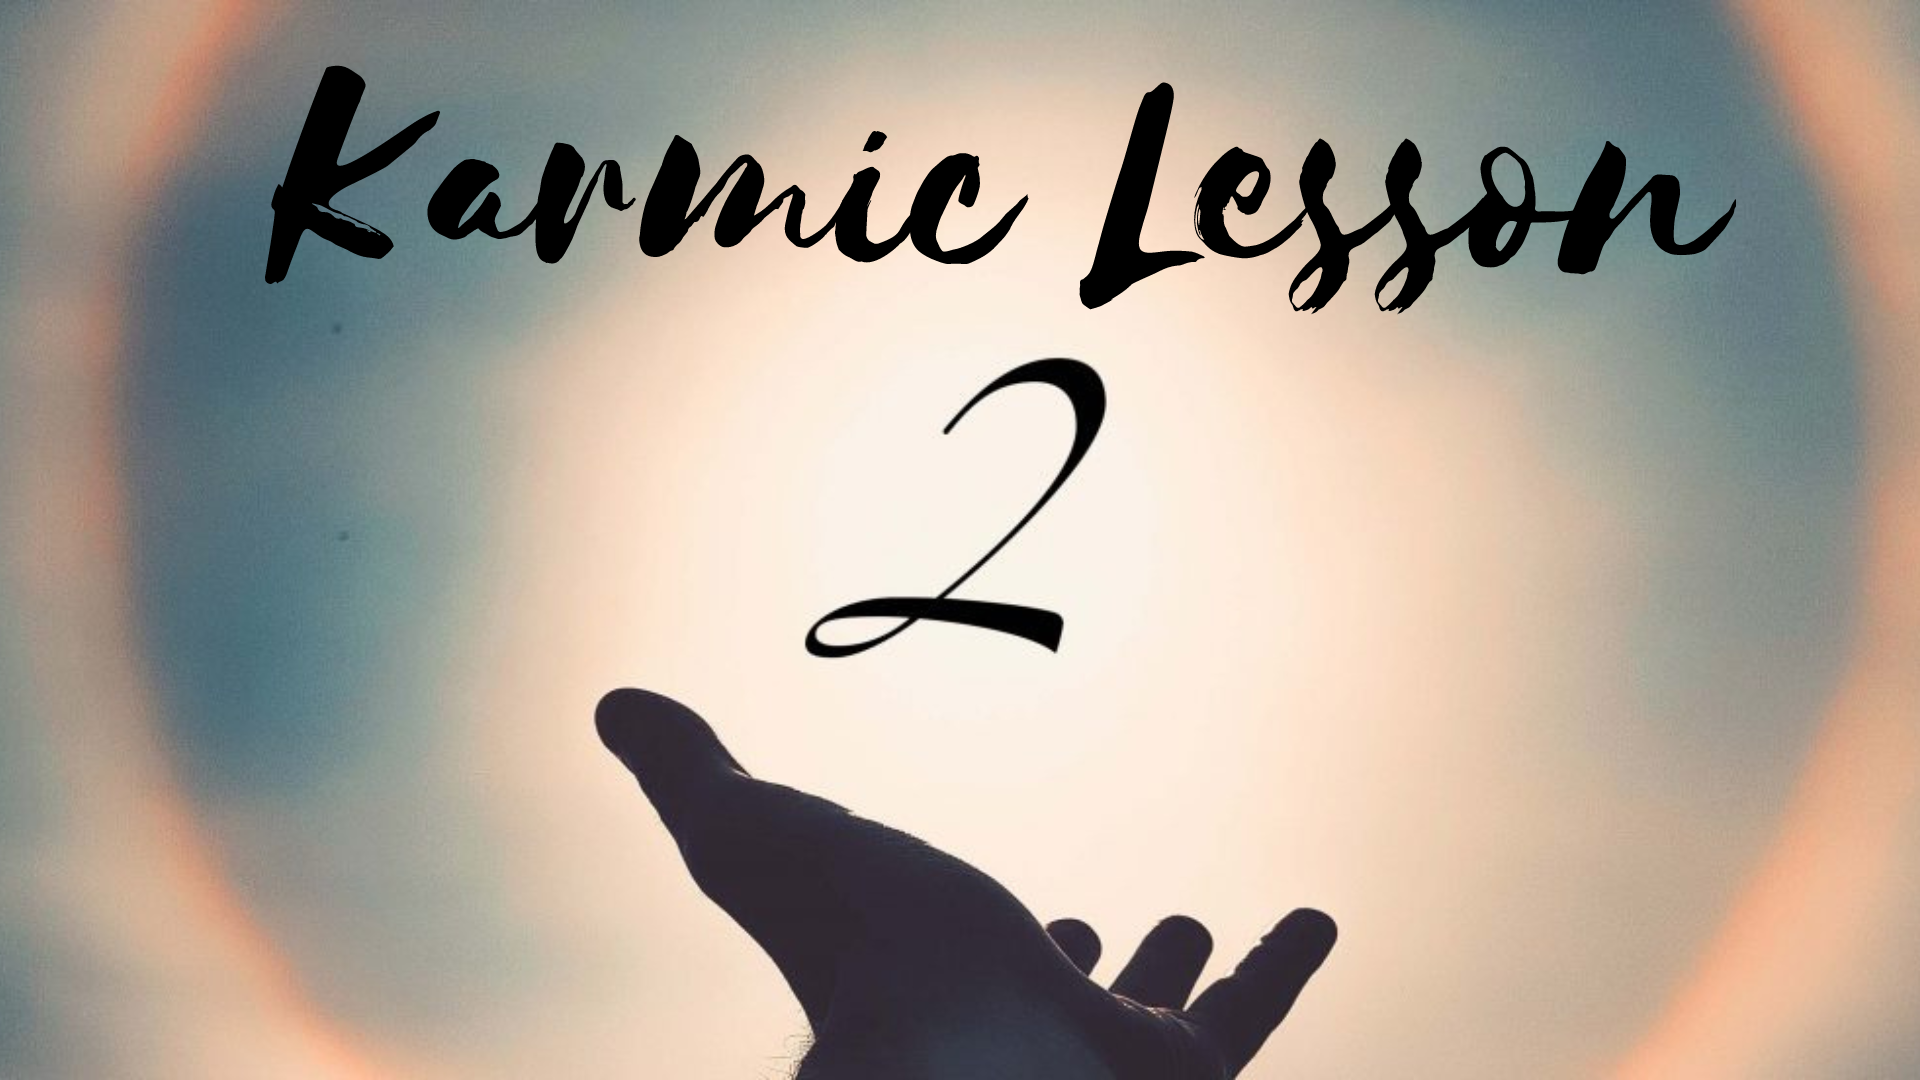 Karmic Lesson 2 - Learning To Be Cooperative With Others